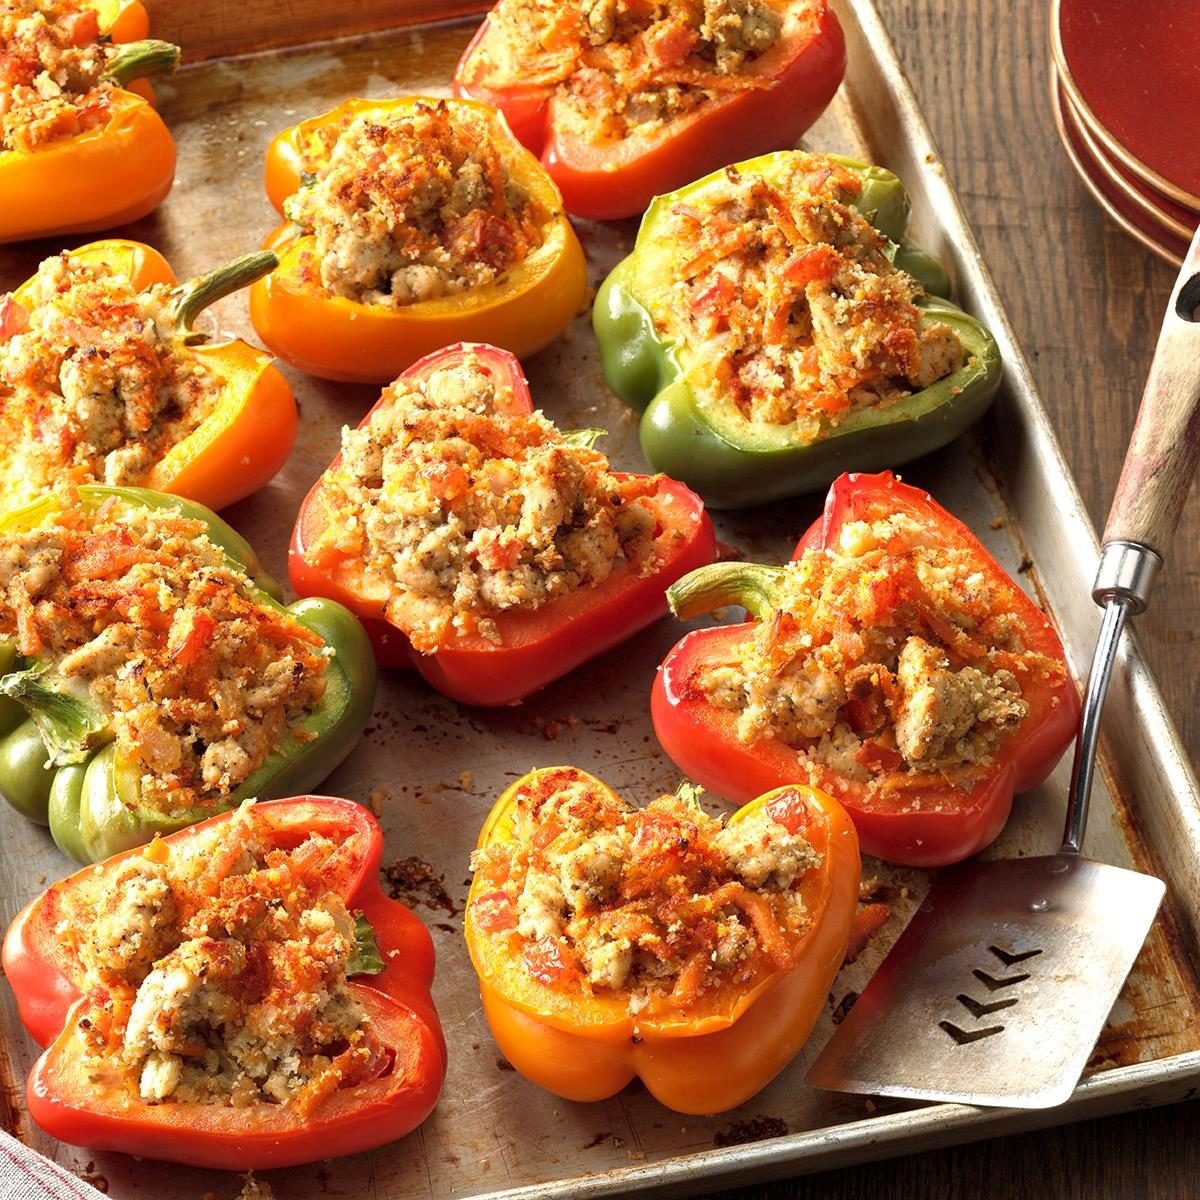 60 Diabetic-Friendly Meals to Add to Your Weeknight Menu